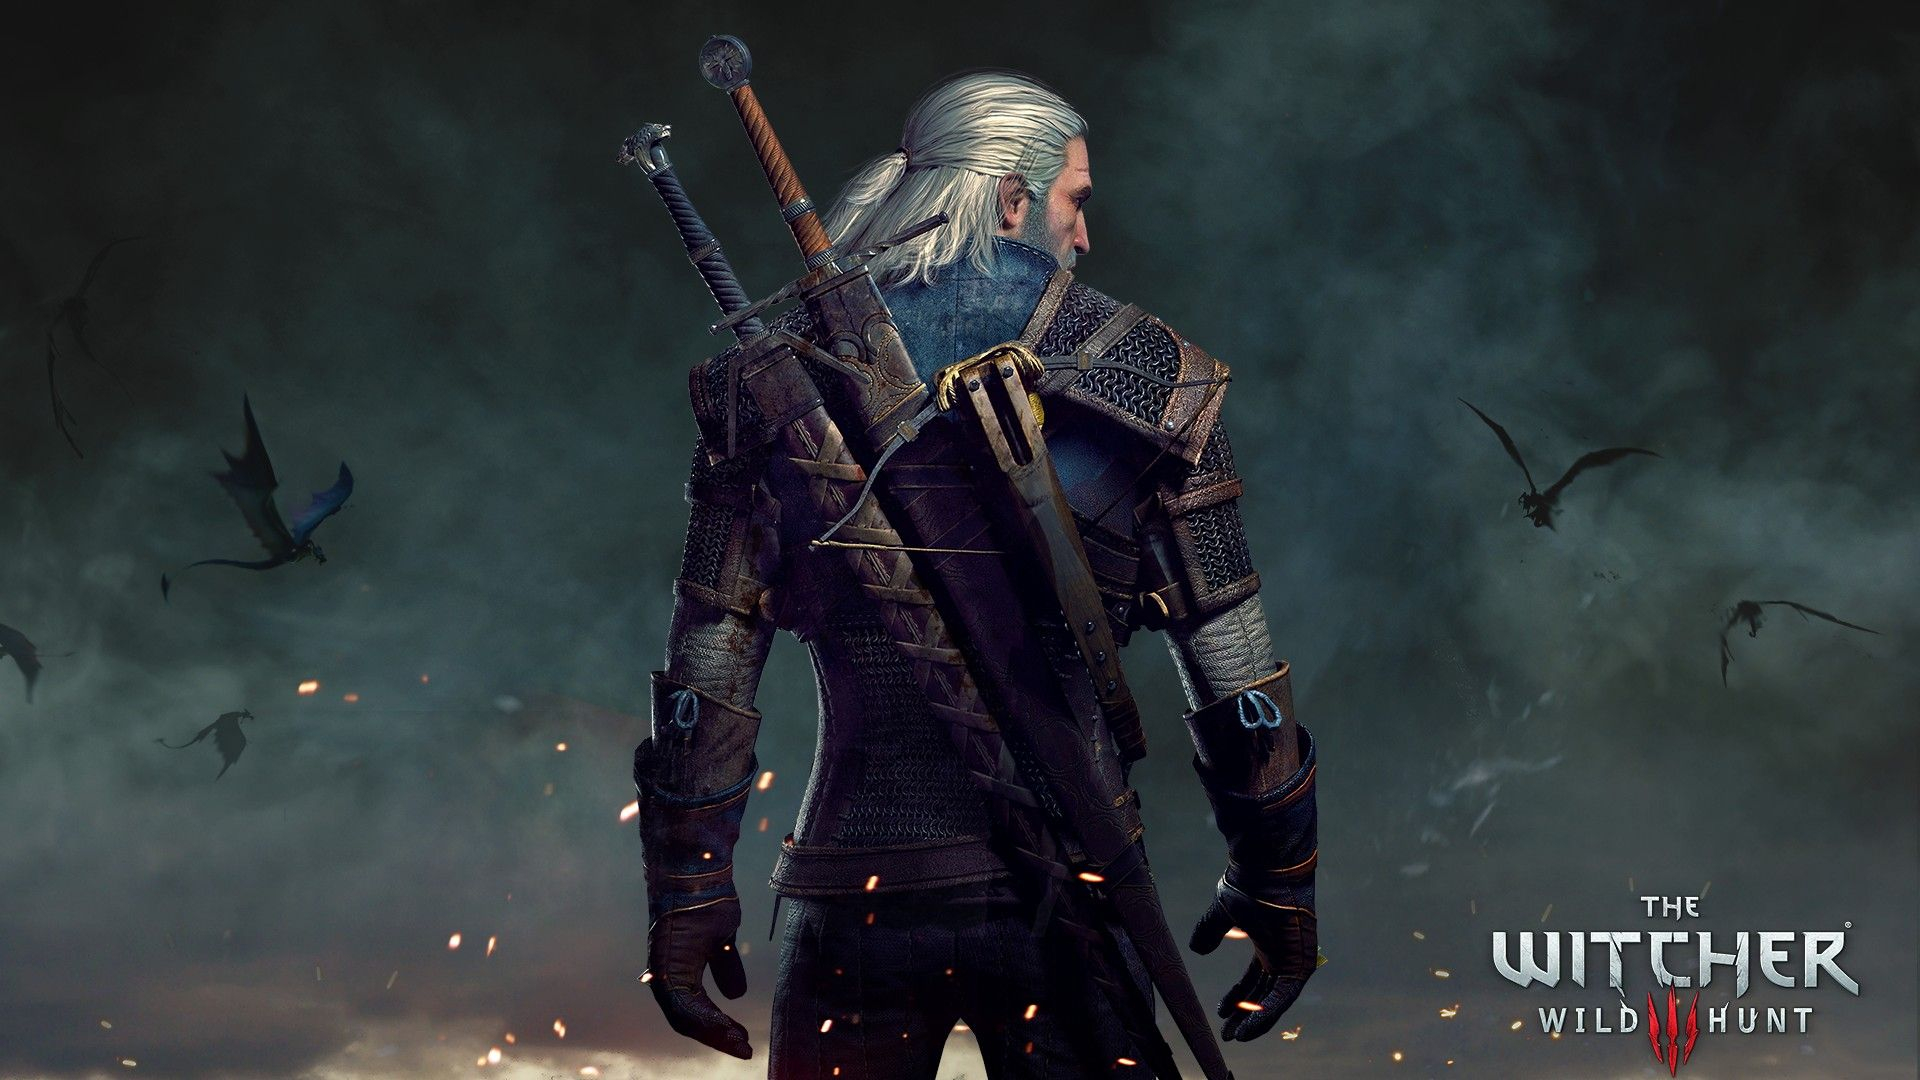 1920x1080 Wallpapers Computer The Witcher Live Wallpaper HD | The witcher, The witcher 3, Witcher 3 wild hunt